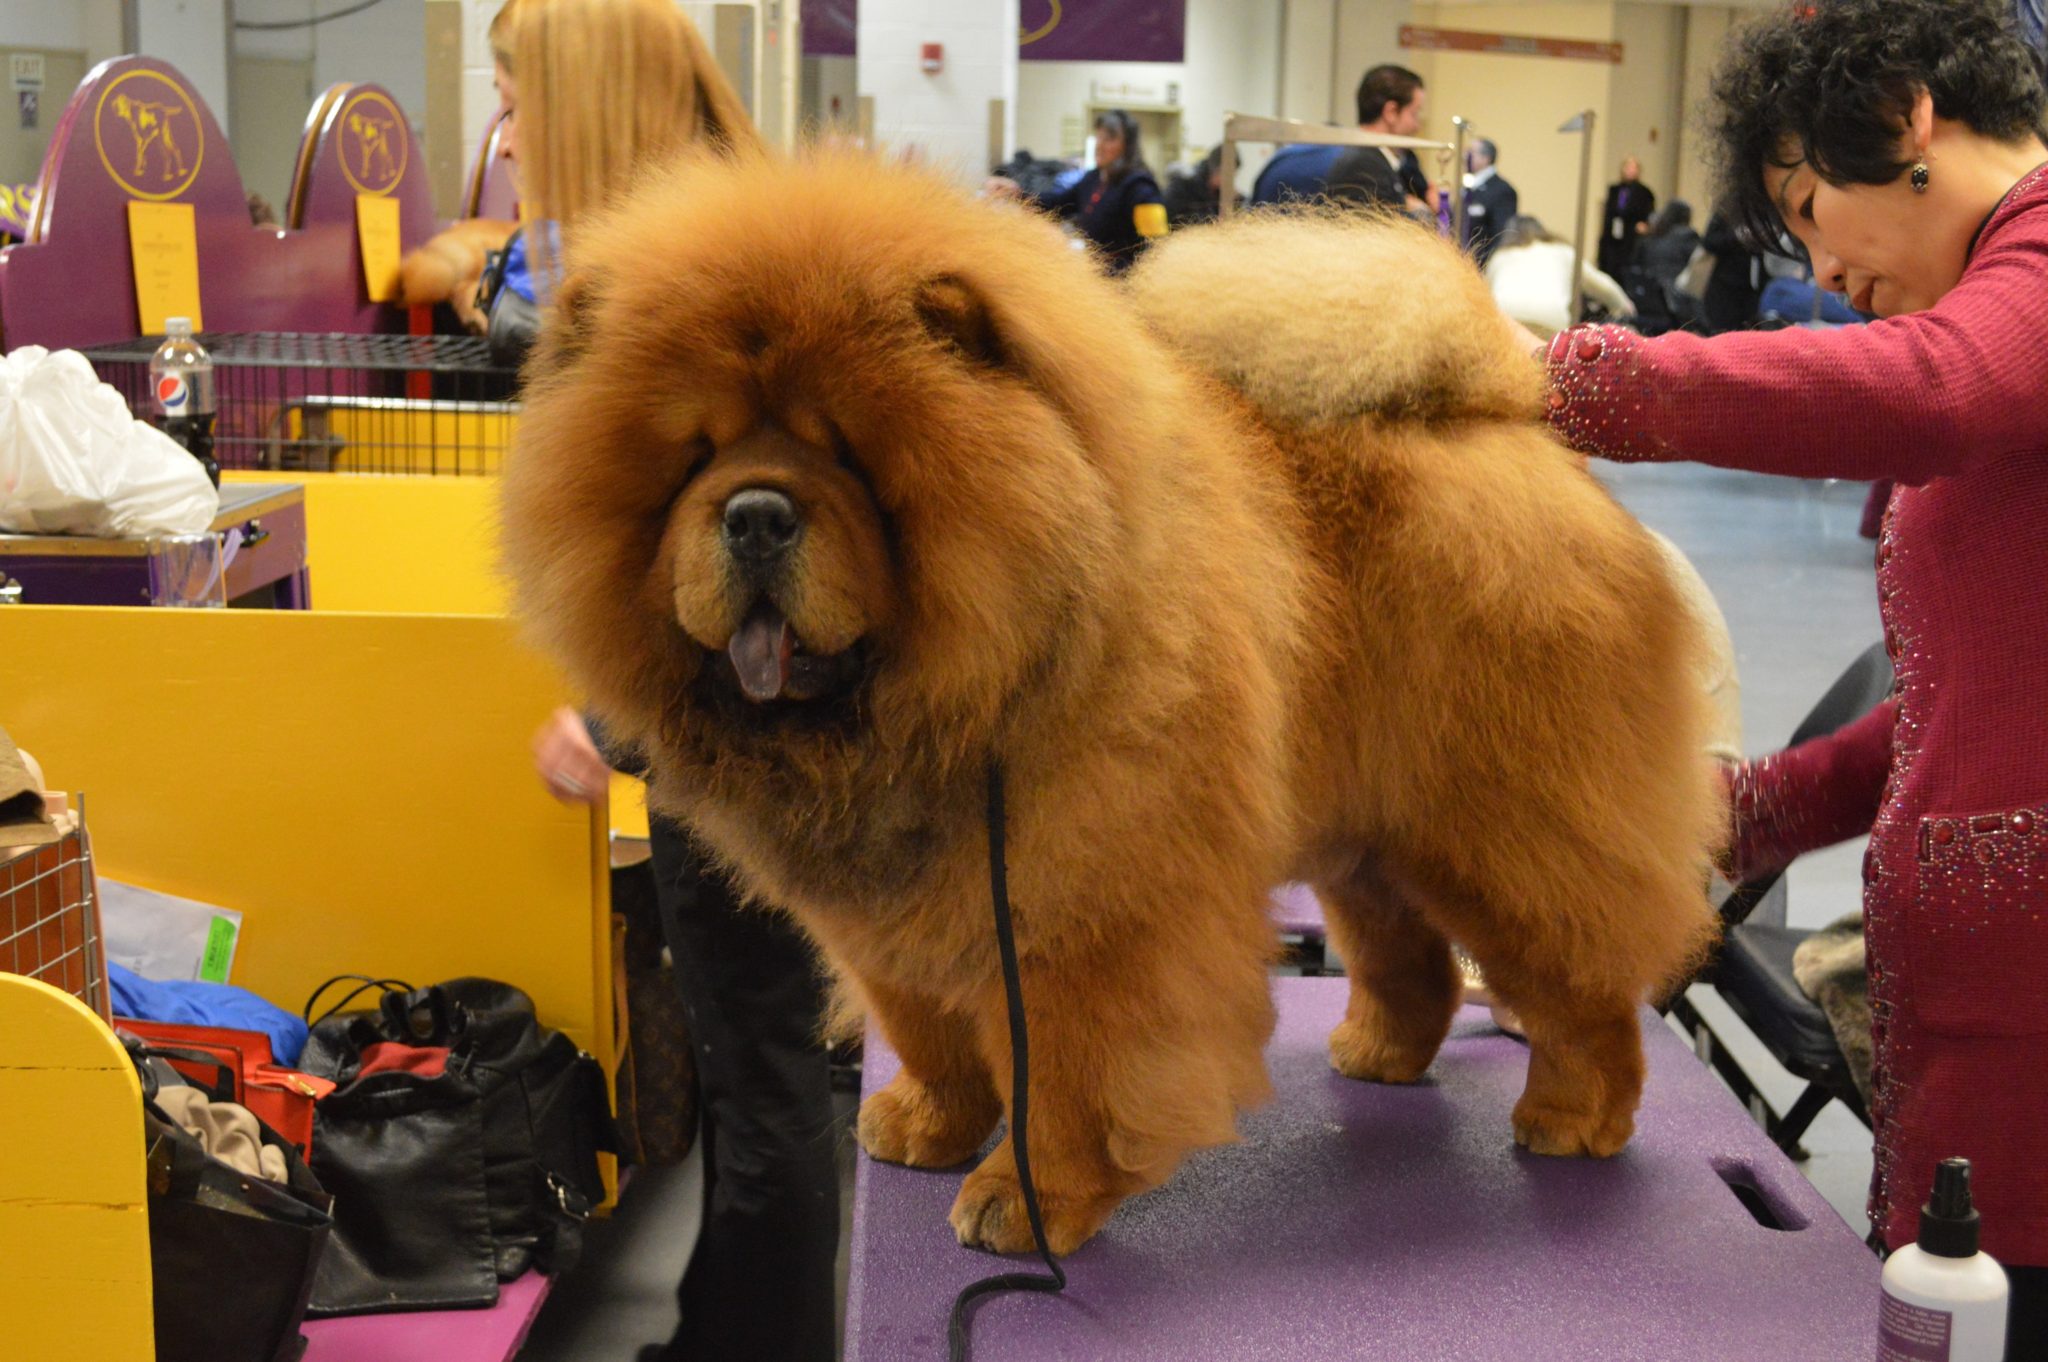 Chow Chow Dogs 101 Interesting Facts and Information #chowchow #dog ...